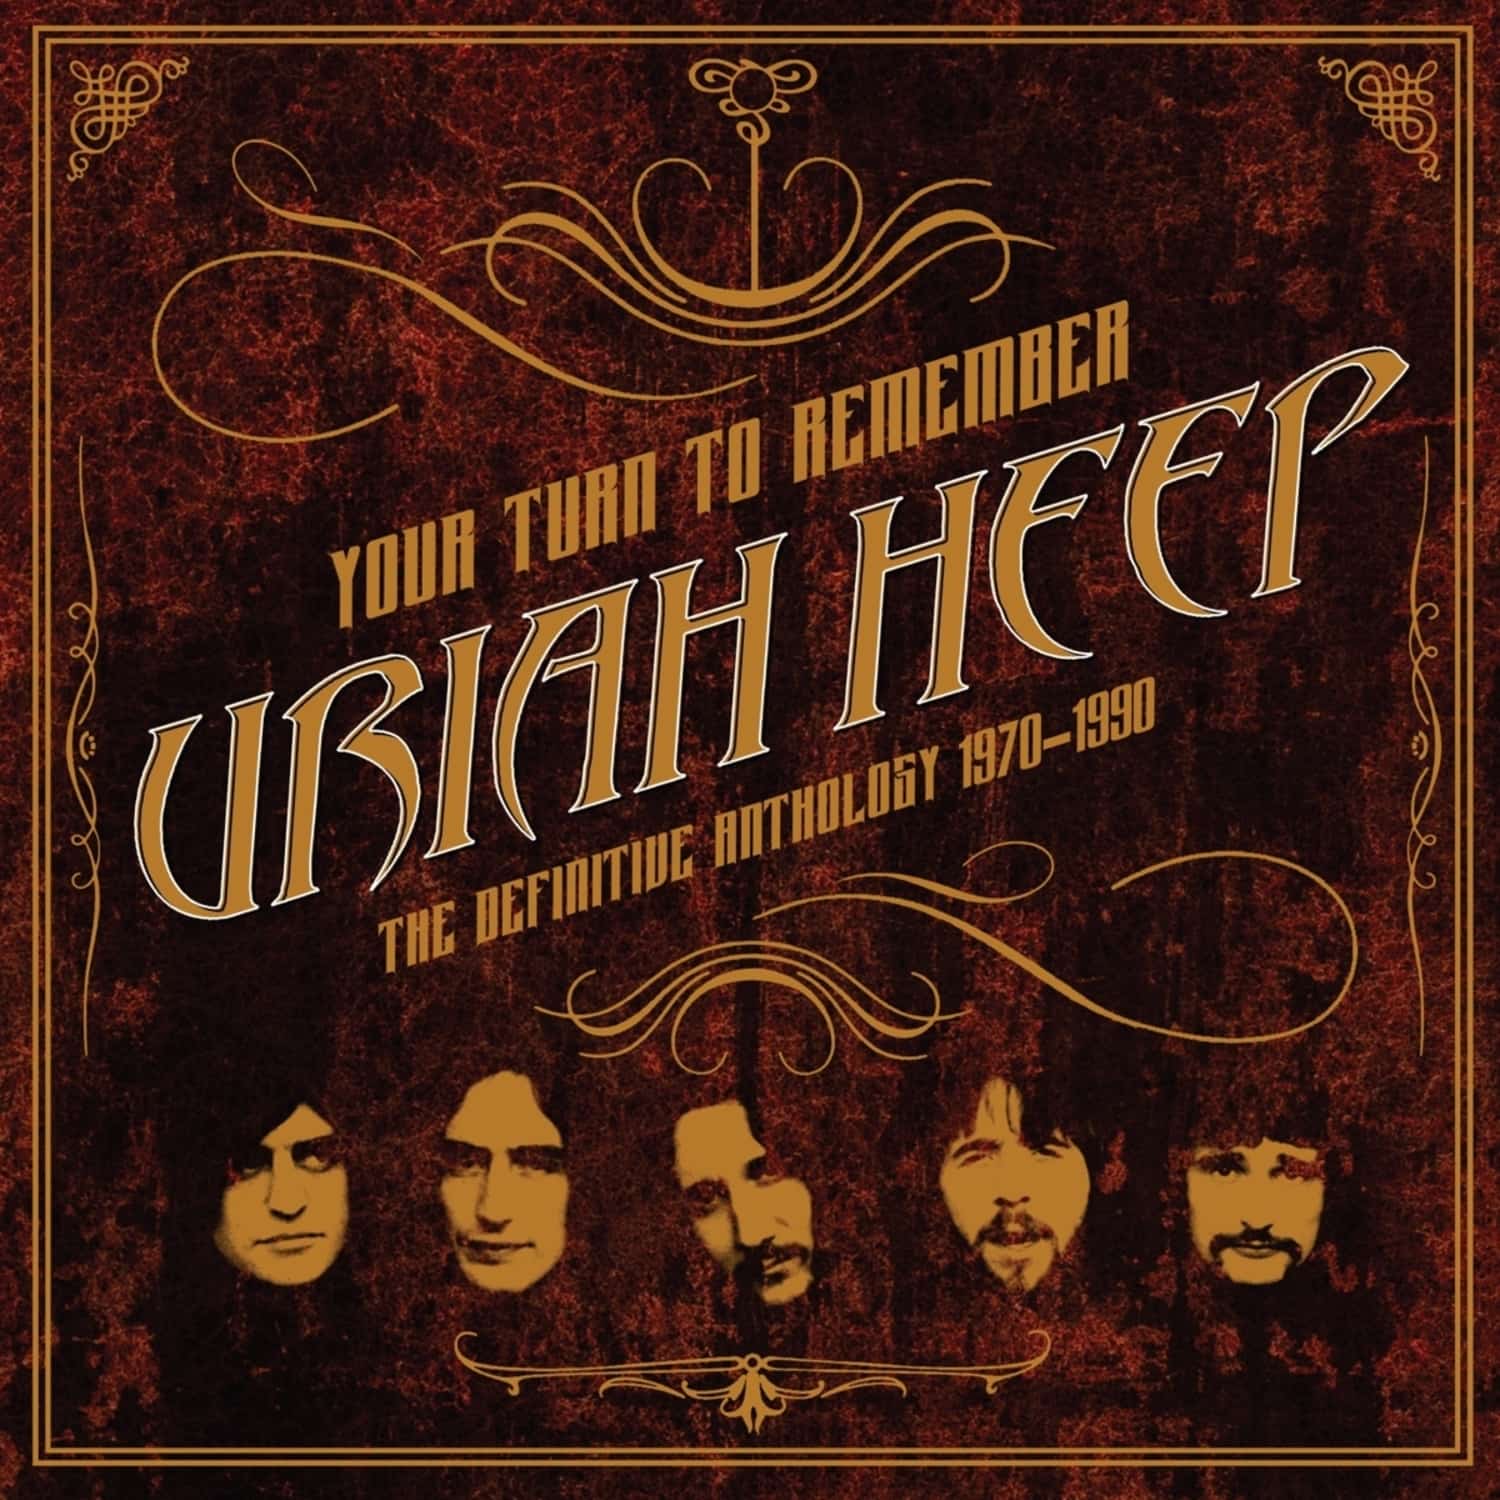 Uriah Heep - YOUR TURN TO REMEMBER:THE DEF.ANTHOLOGY 1970-1990 